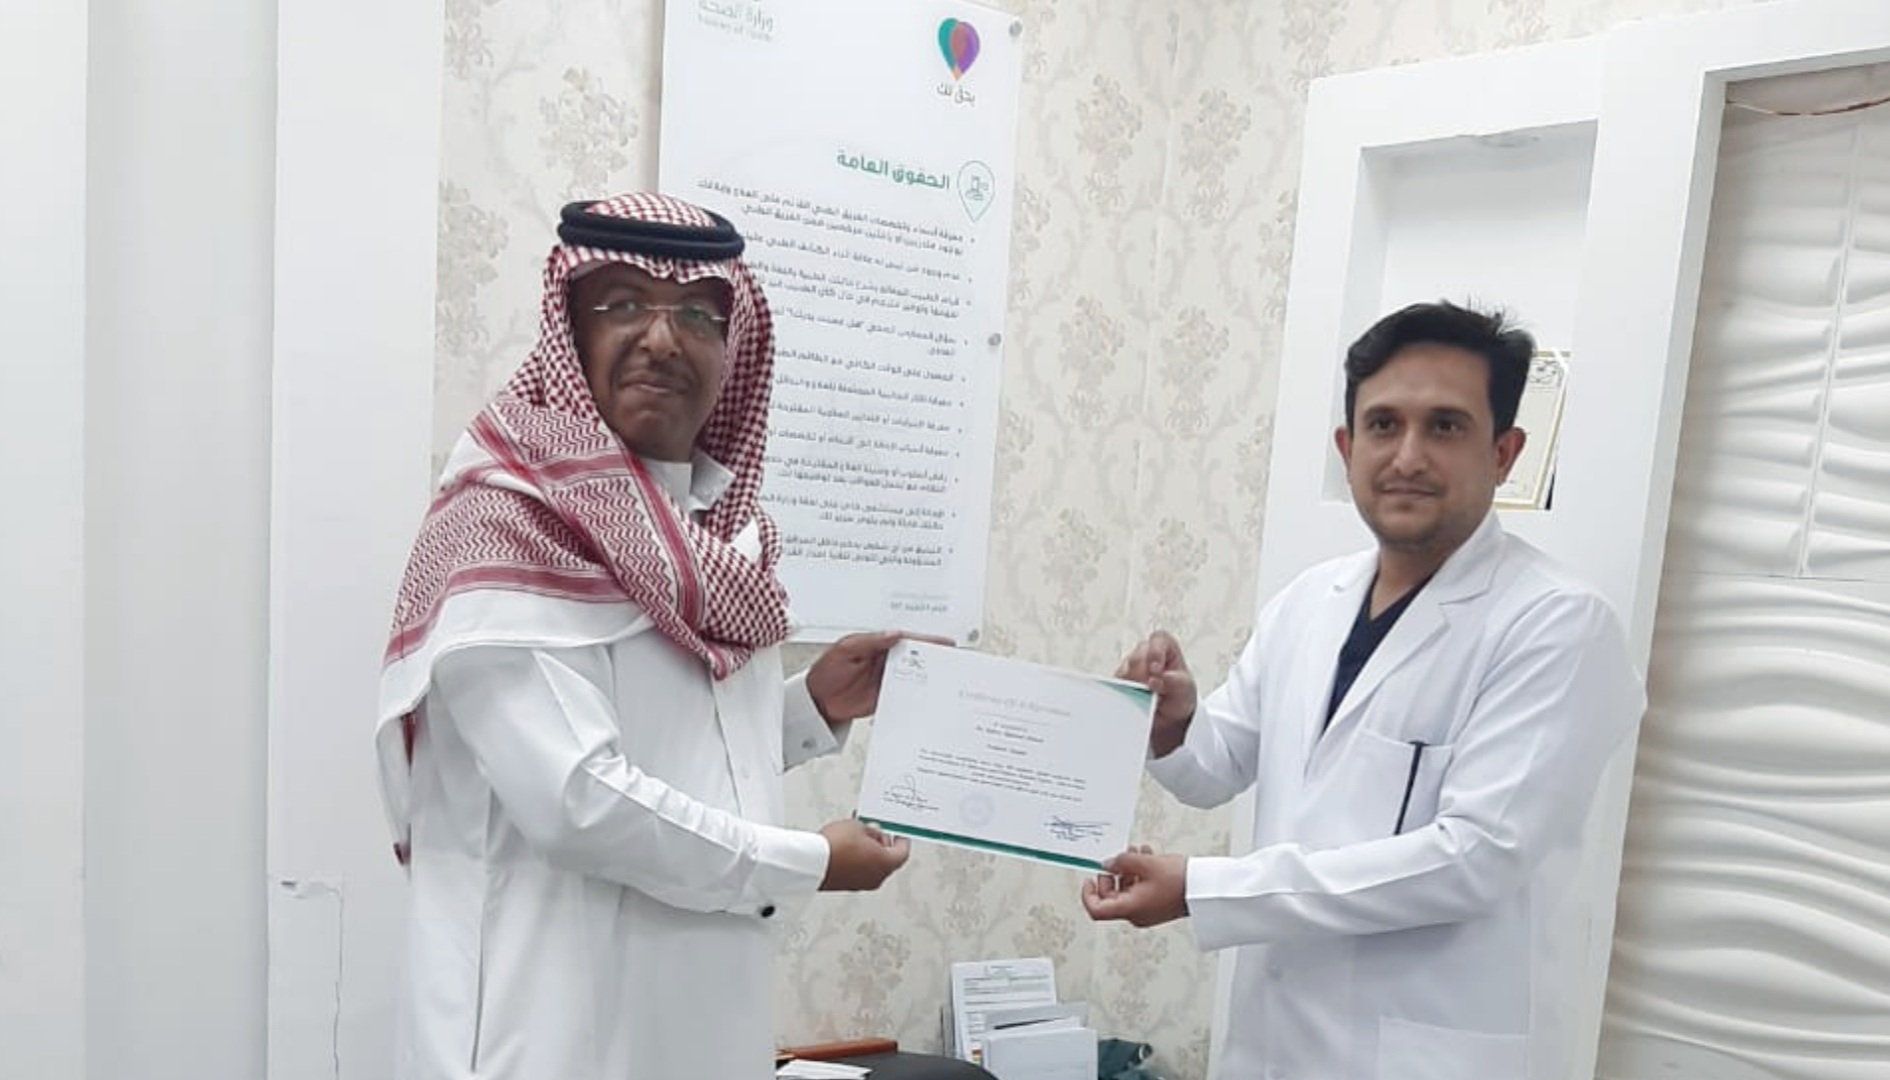 Award from the Government of Saudi Arabia